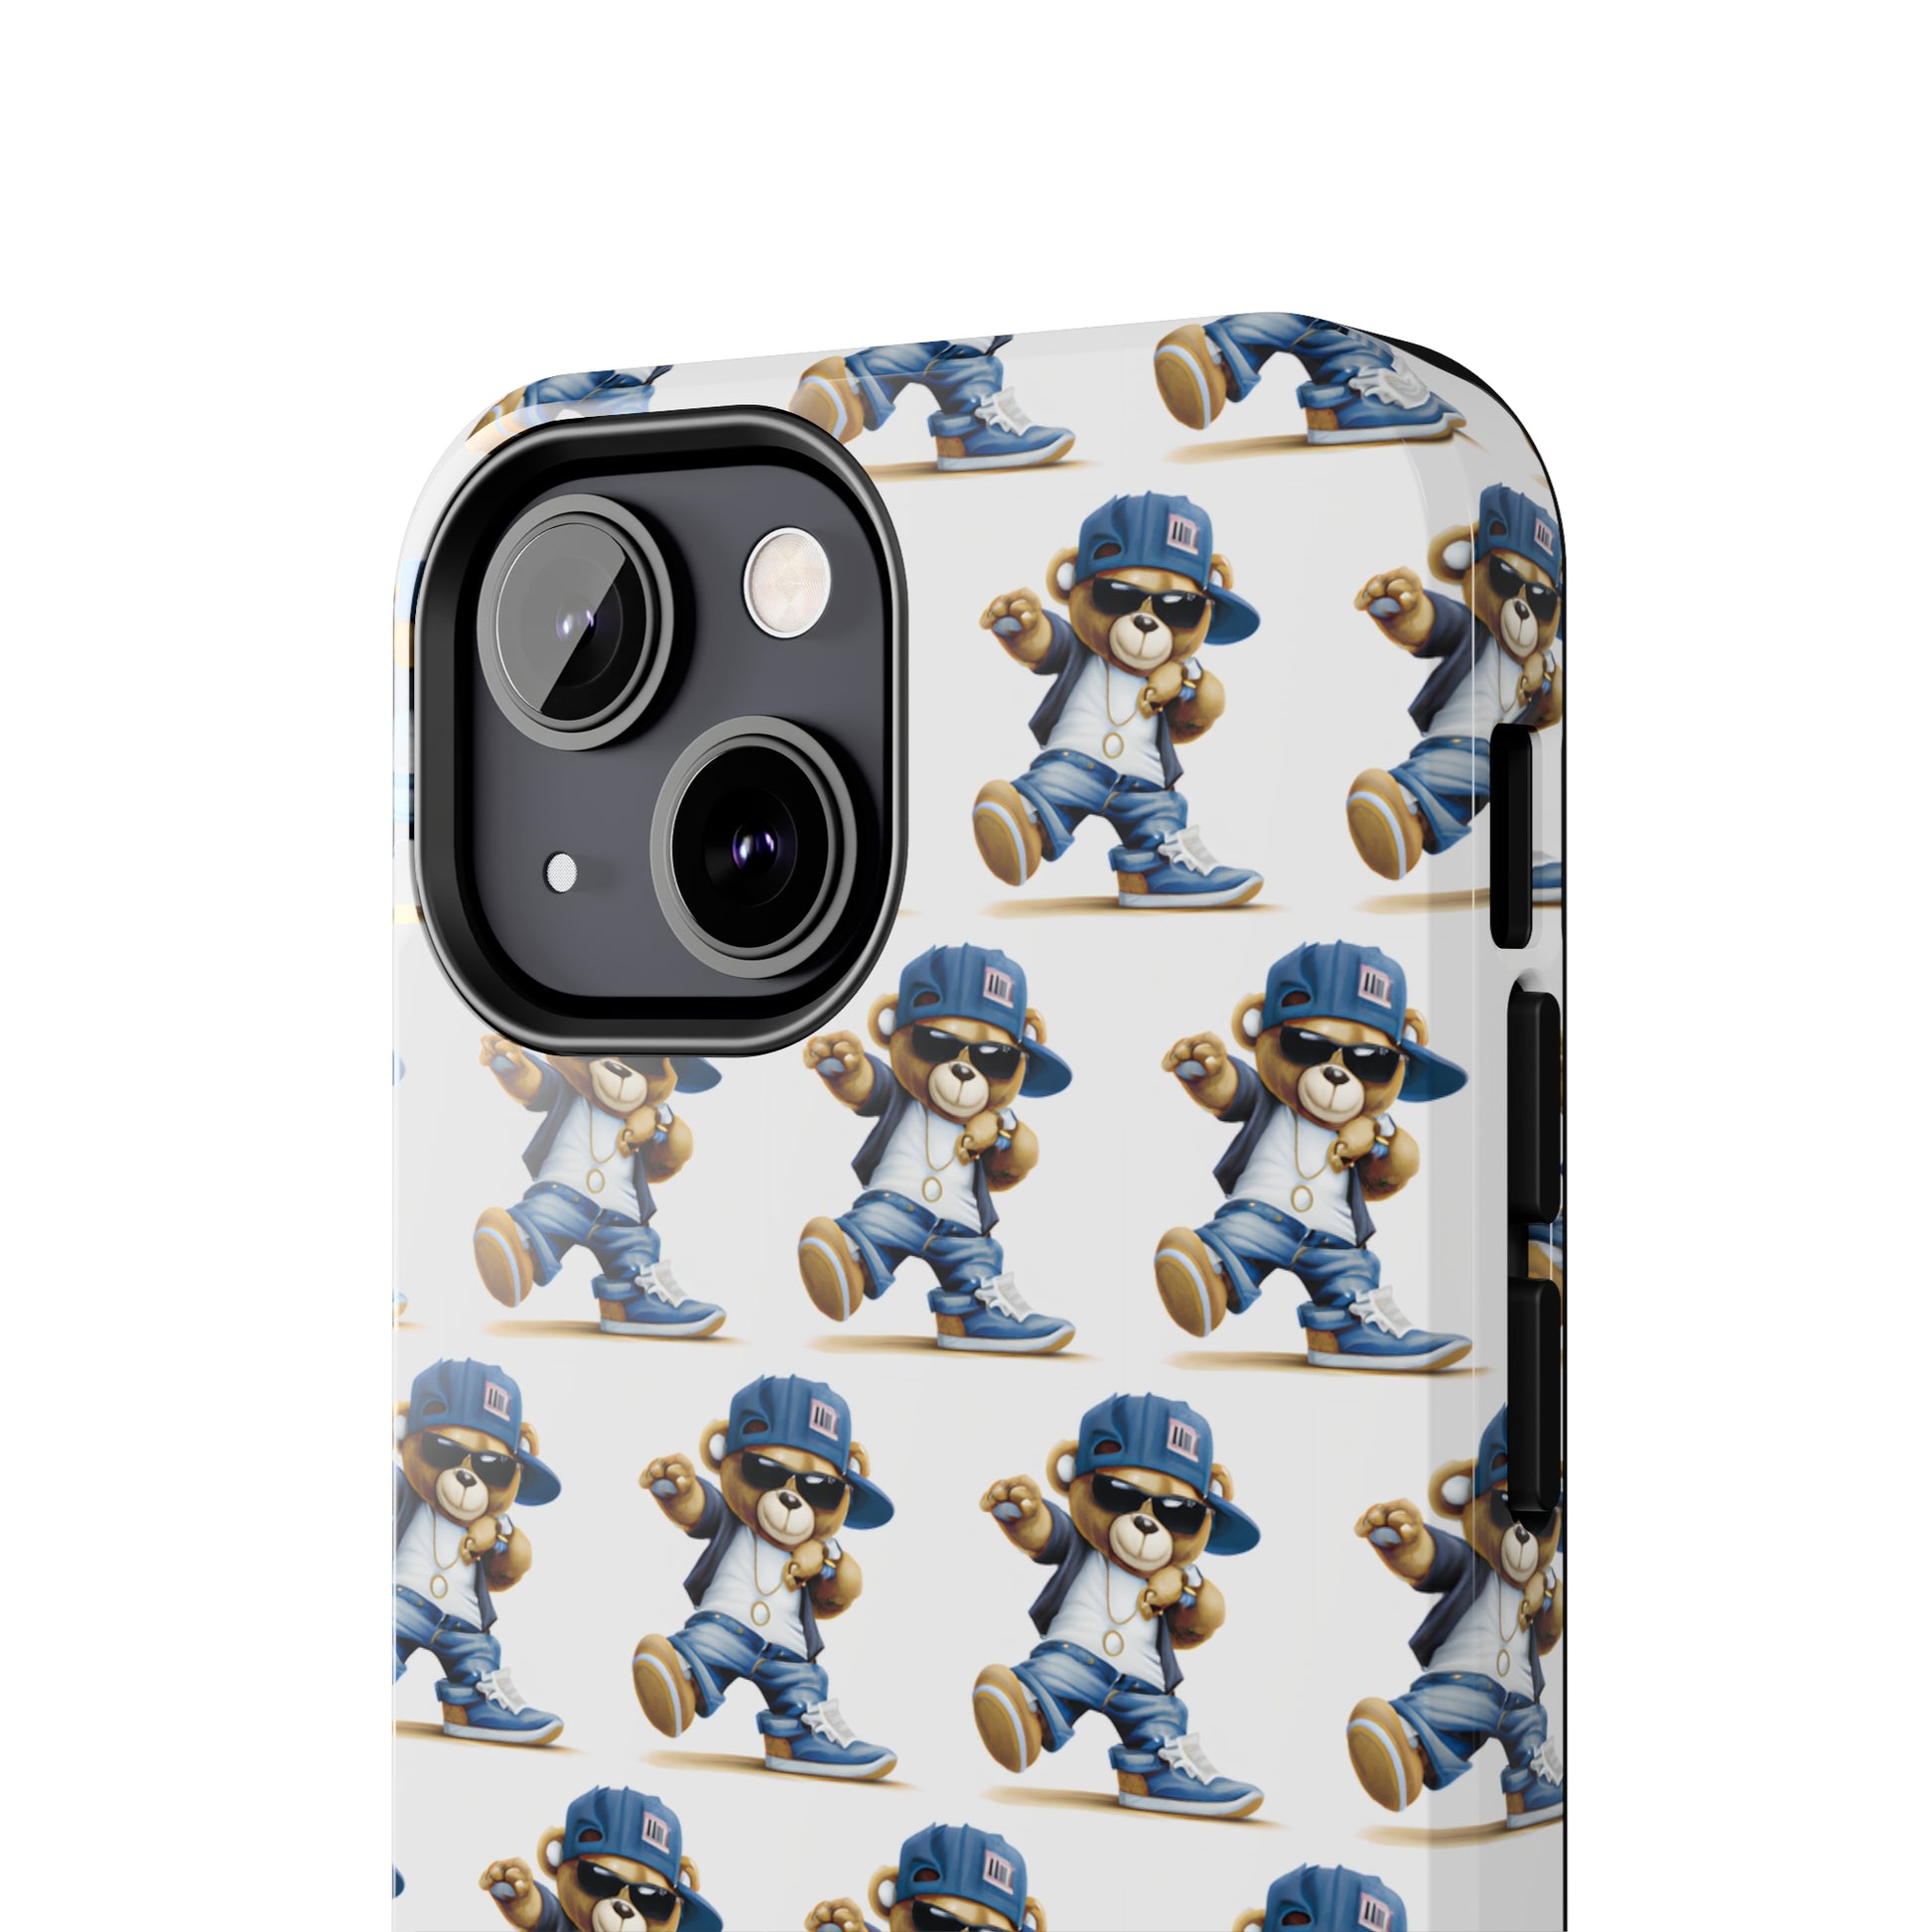 Teddy Wrapper: iPhone Tough Case Design - Wireless Charging - Superior Protection - Original Graphics by TheGlassyLass.com